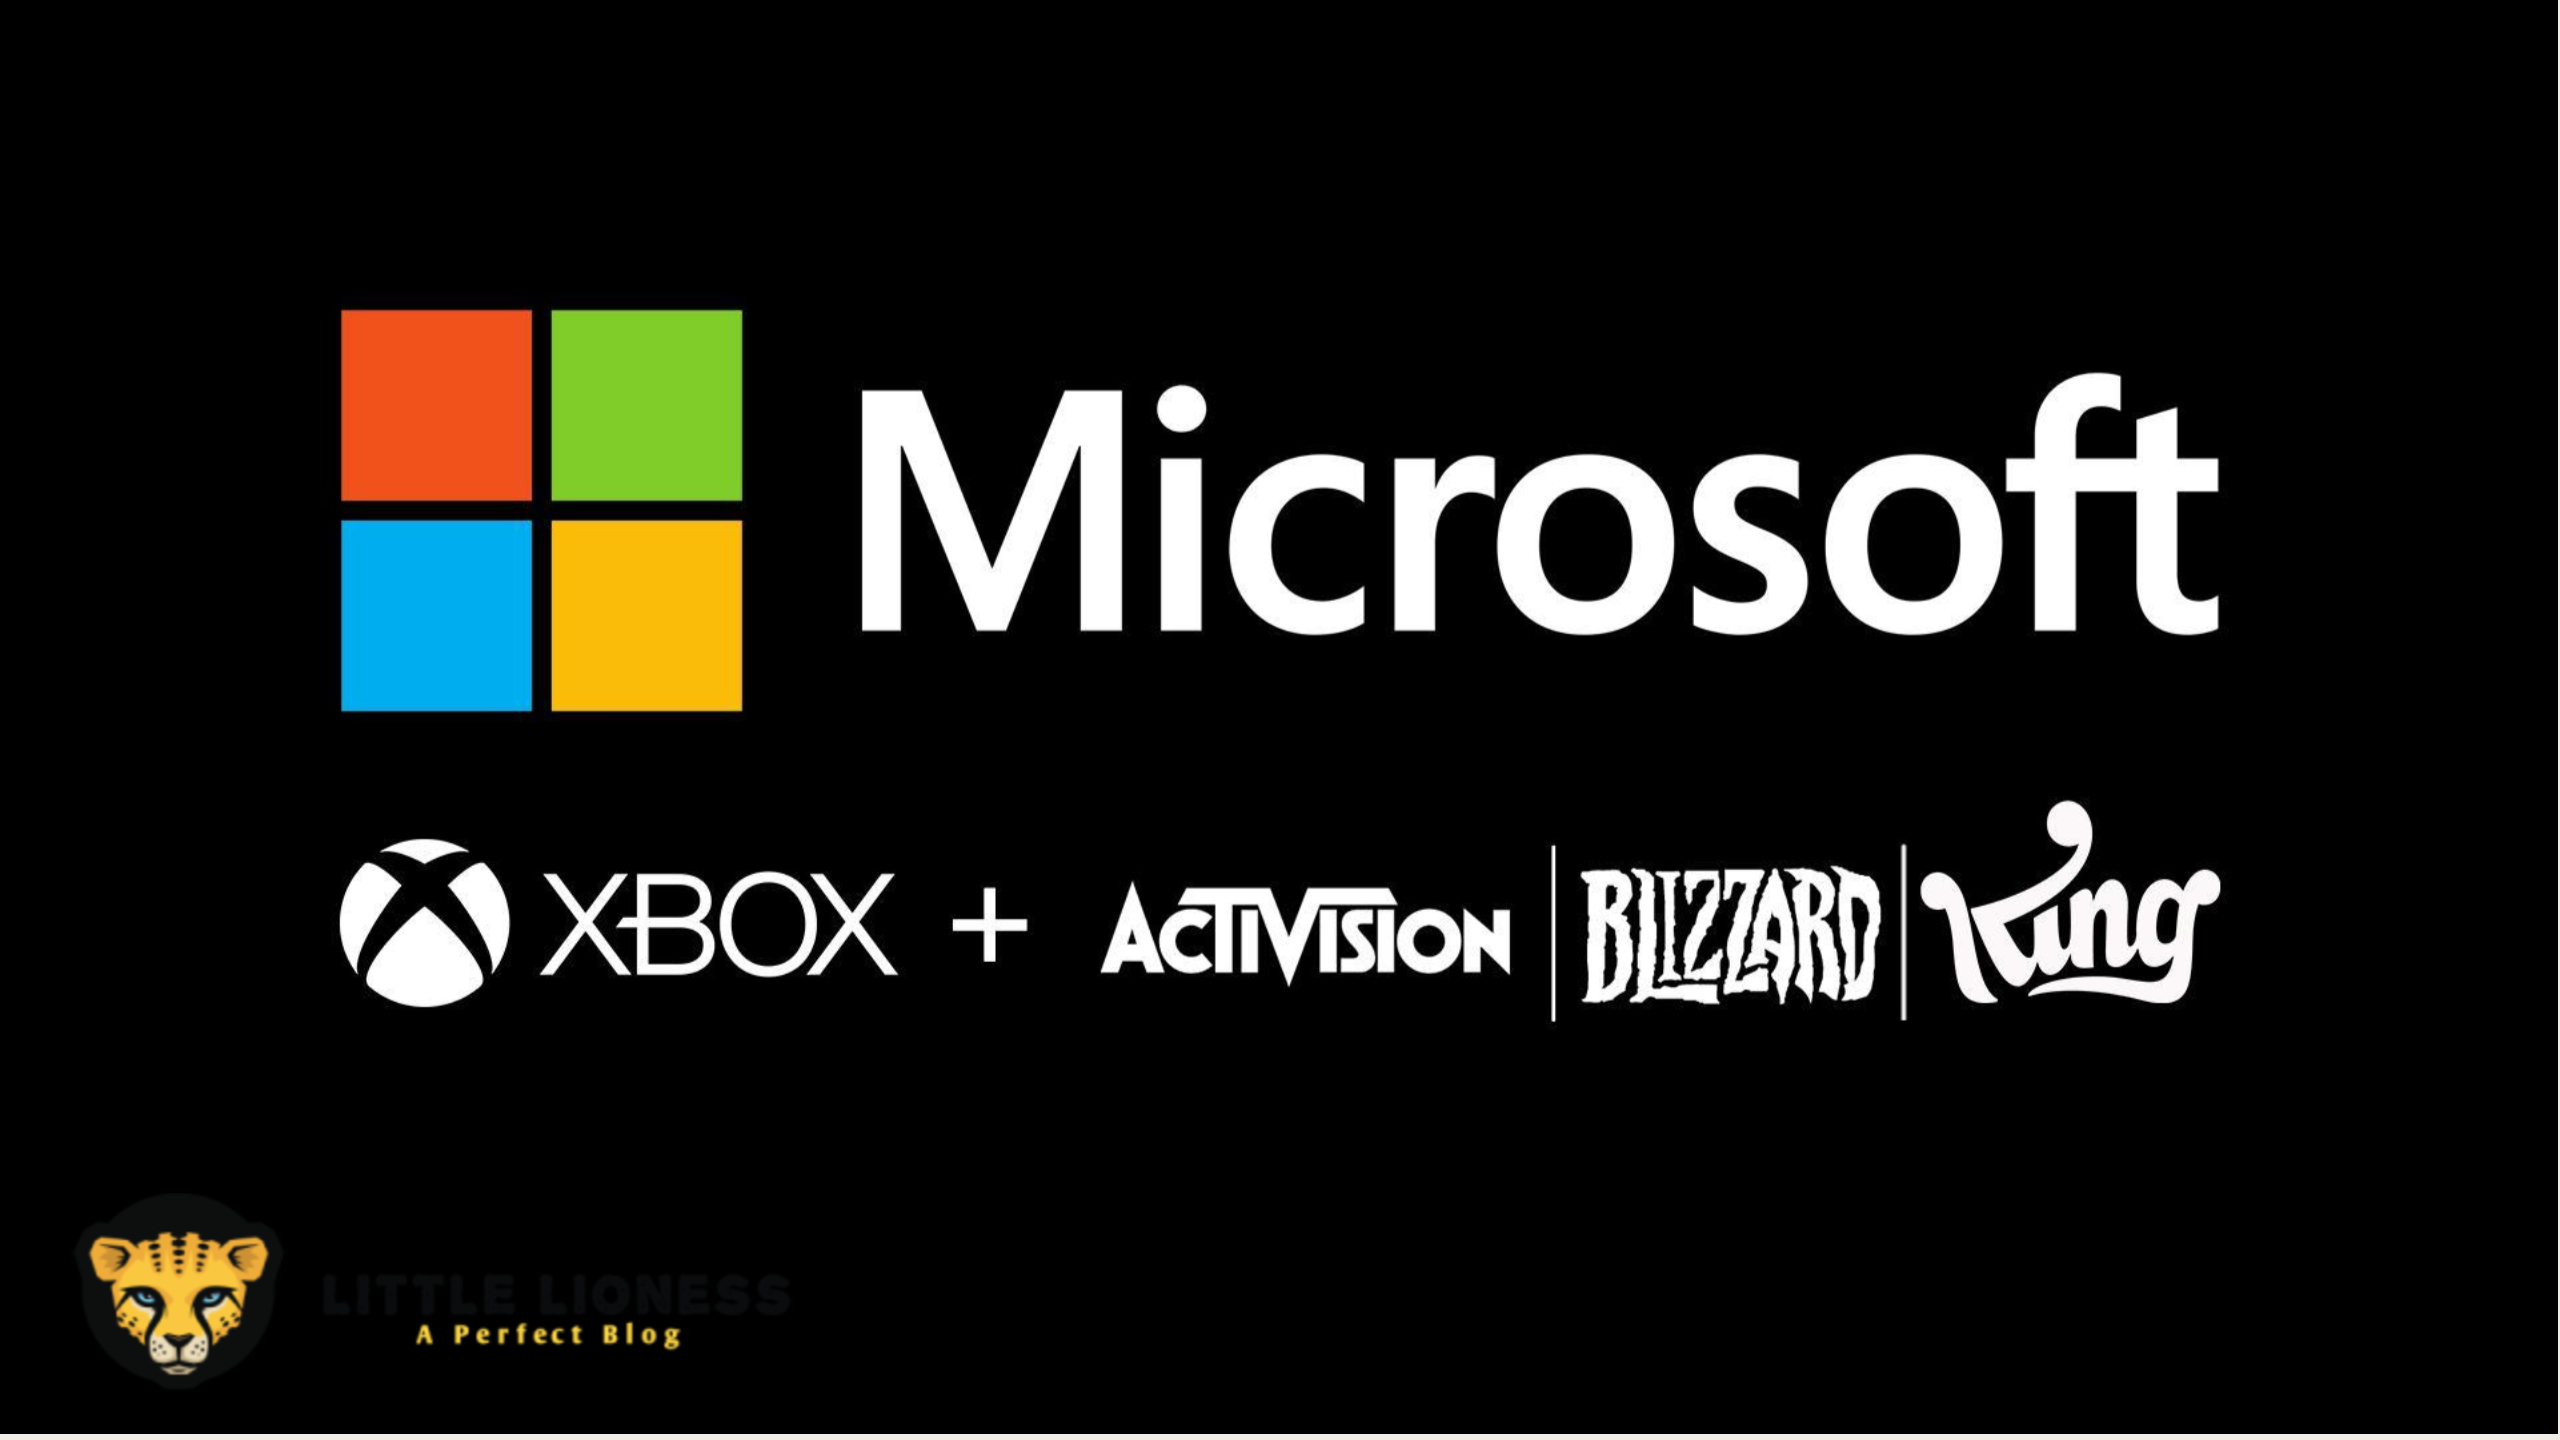 rajkotupdates.news : Microsoft Gaming Company to buy Activision Blizzard for rs 5 lakh Crore